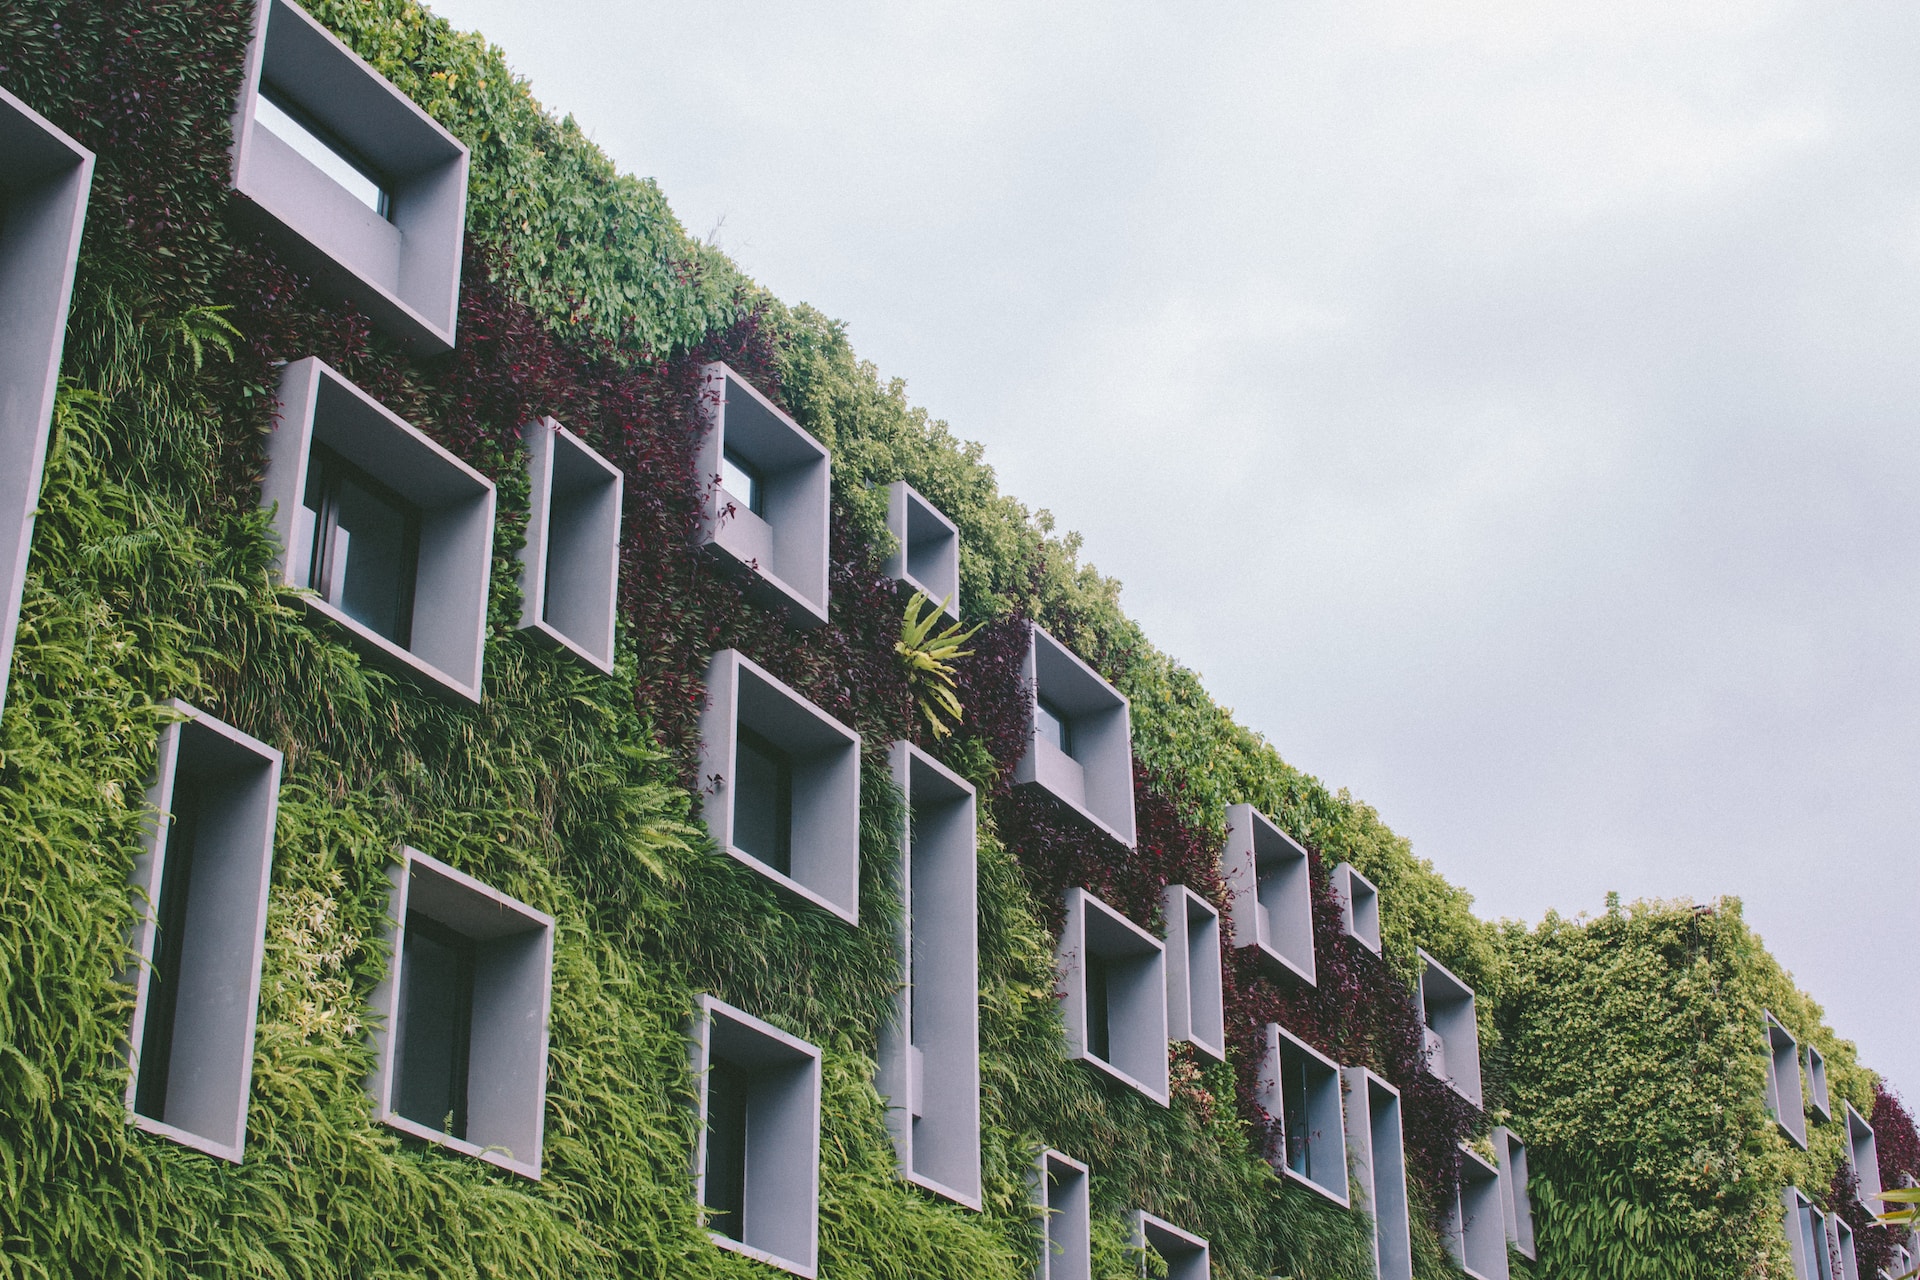 Innovative apartment building in Bali, Indonesia, encouraging green efforts.